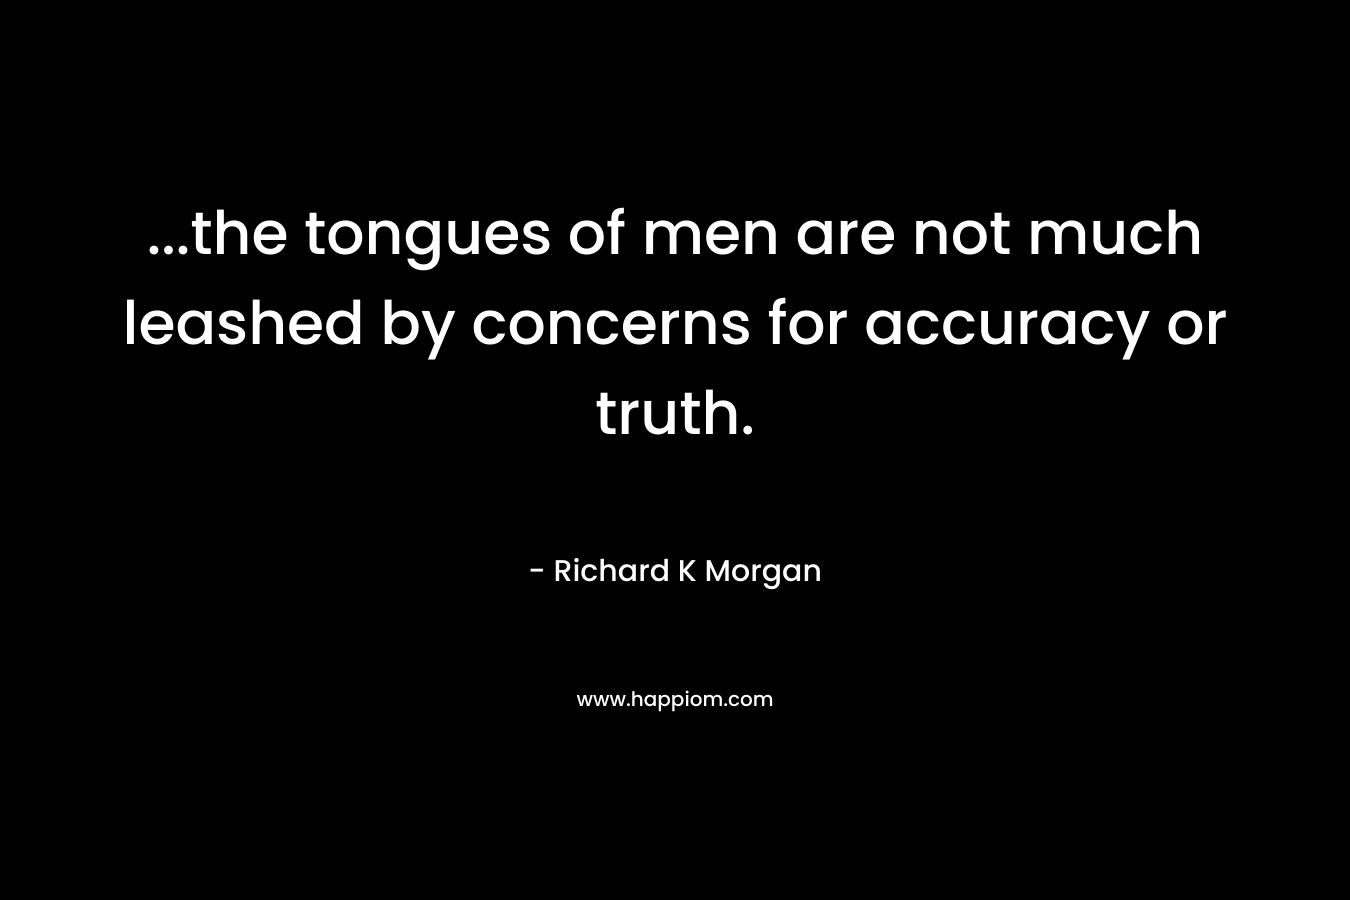 …the tongues of men are not much leashed by concerns for accuracy or truth. – Richard K Morgan